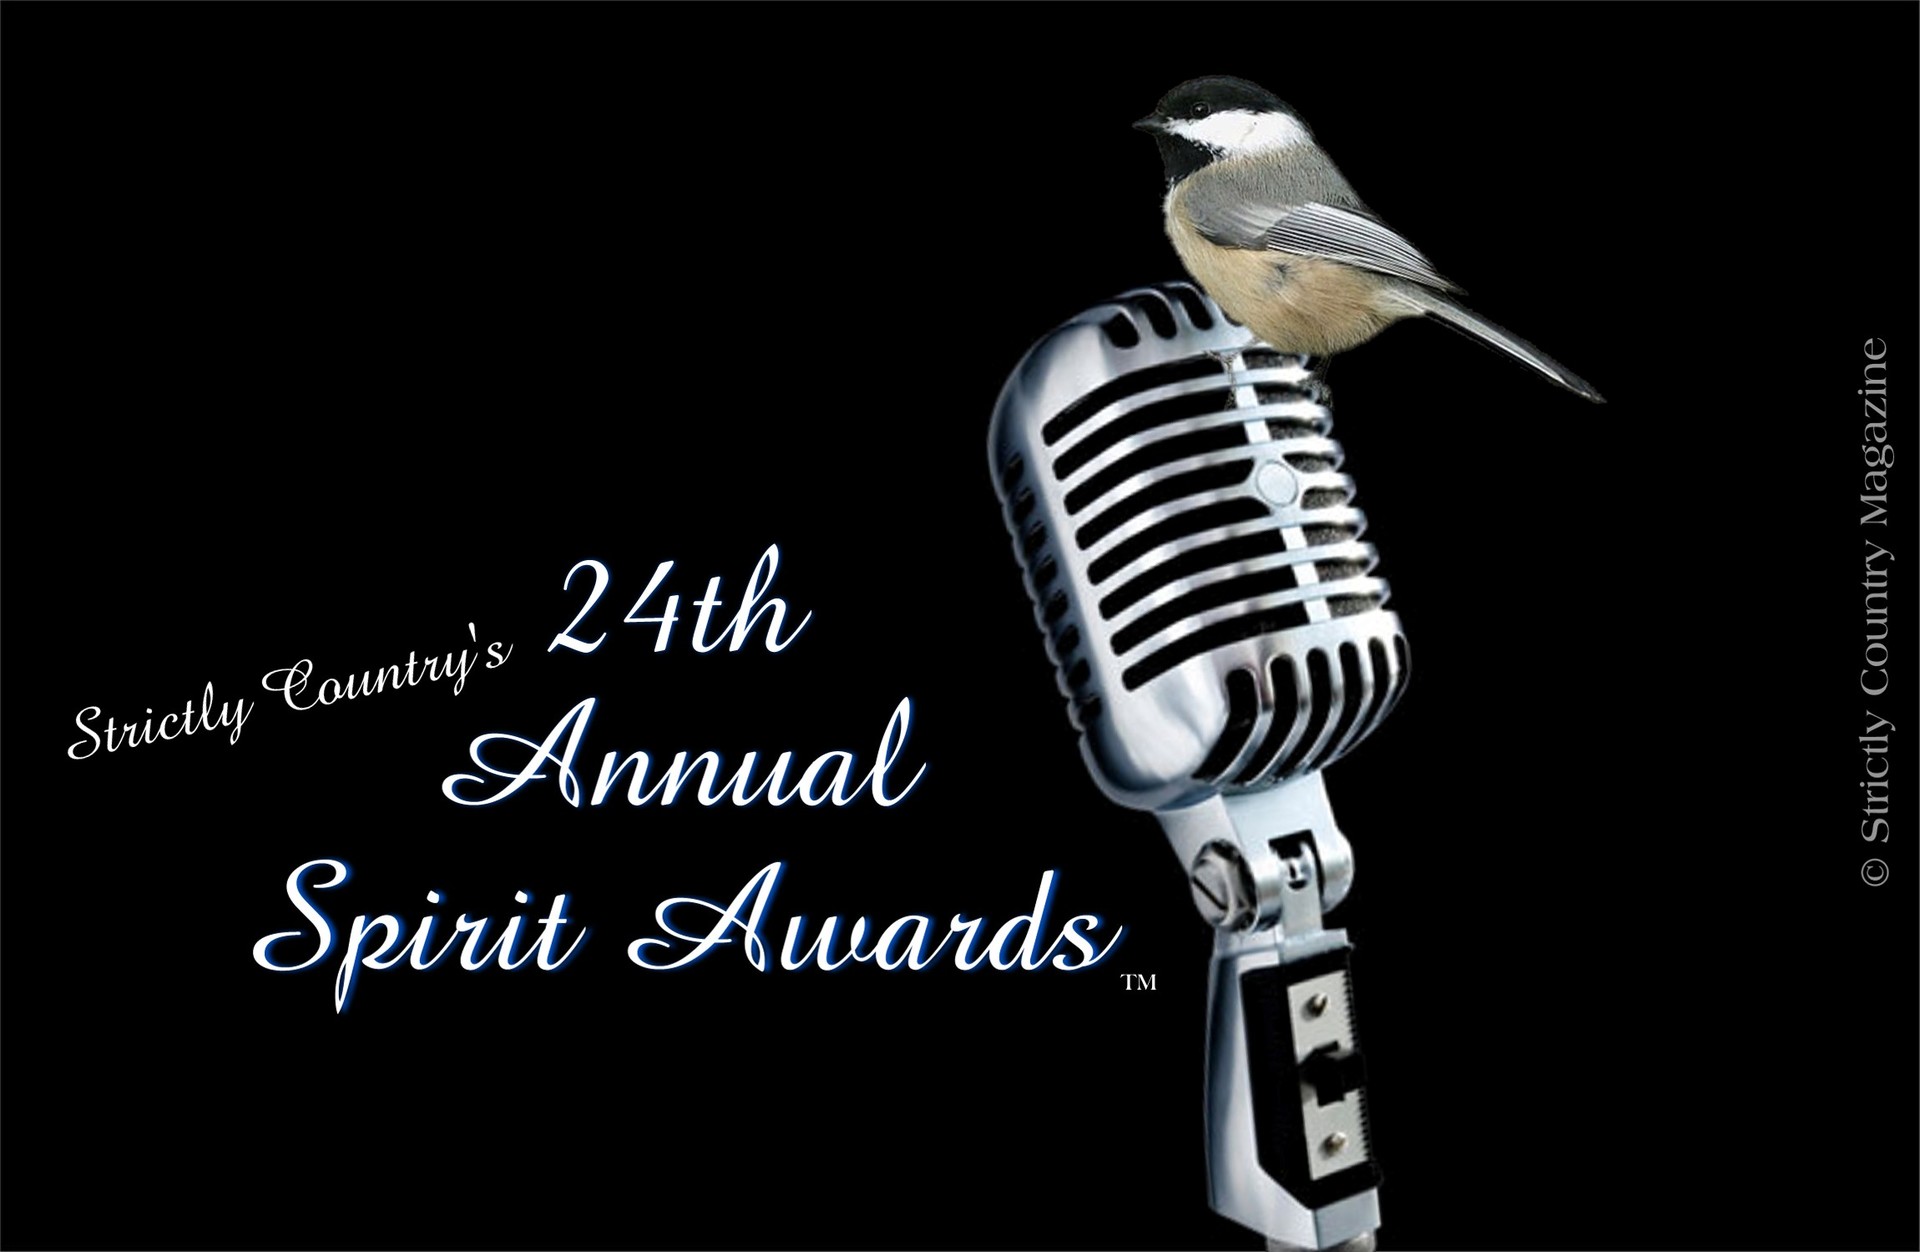 Strictly Country Magazine copyright 24th Annual Spirit Awards official logo